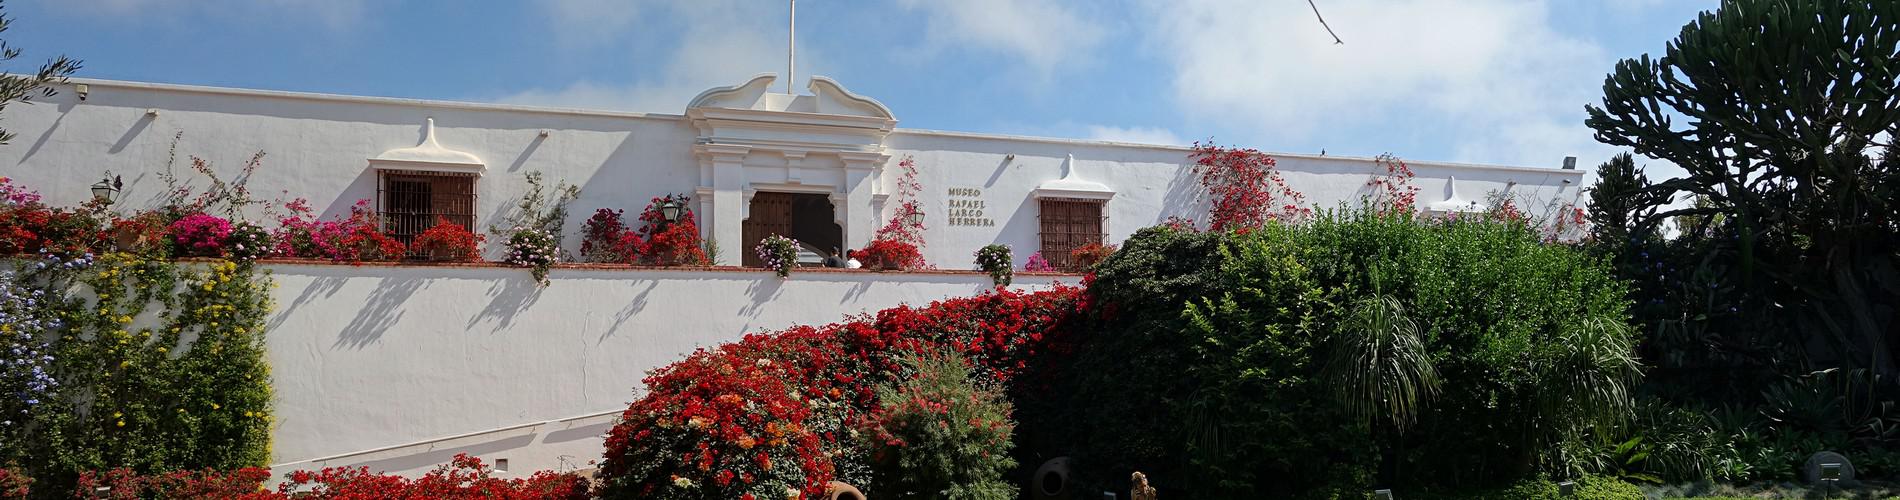 Half-Day Lima City and Larco Museum Tour